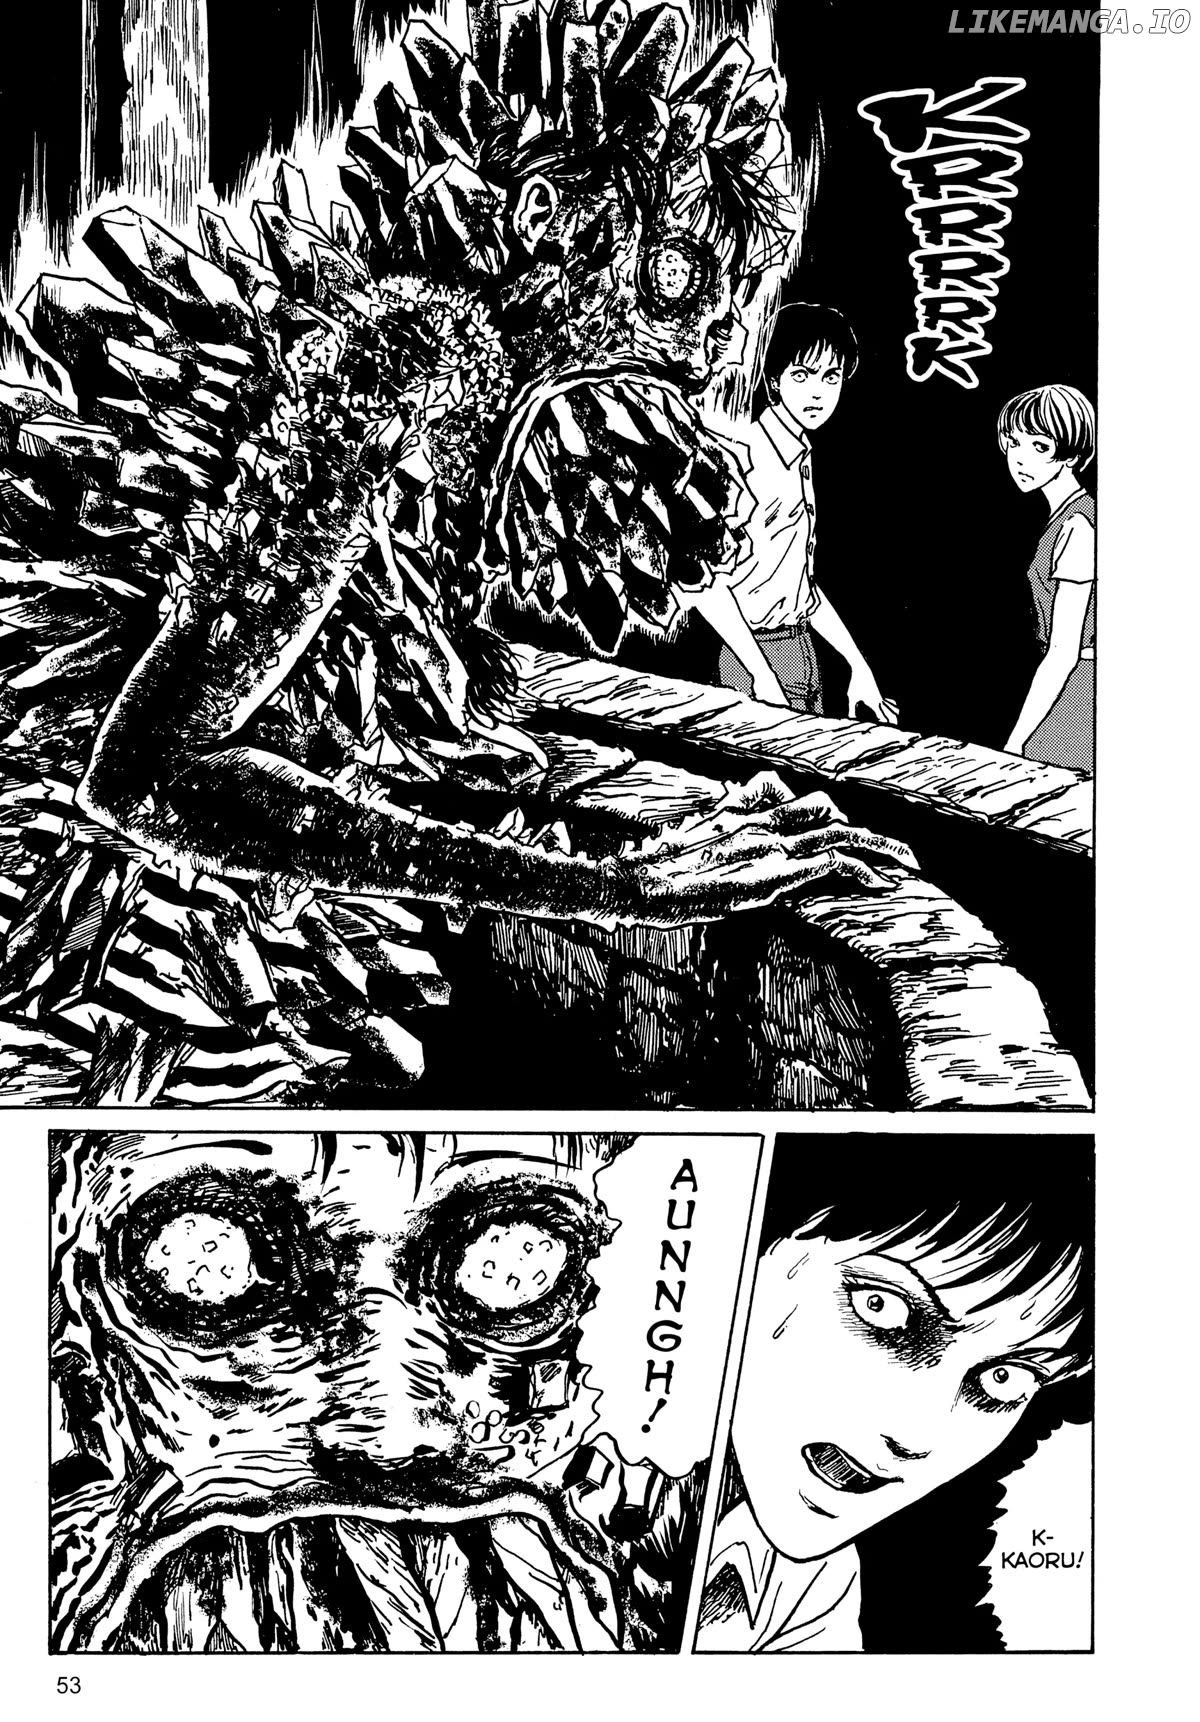 Tombs - Junji Ito Story Collection chapter 1 - page 54